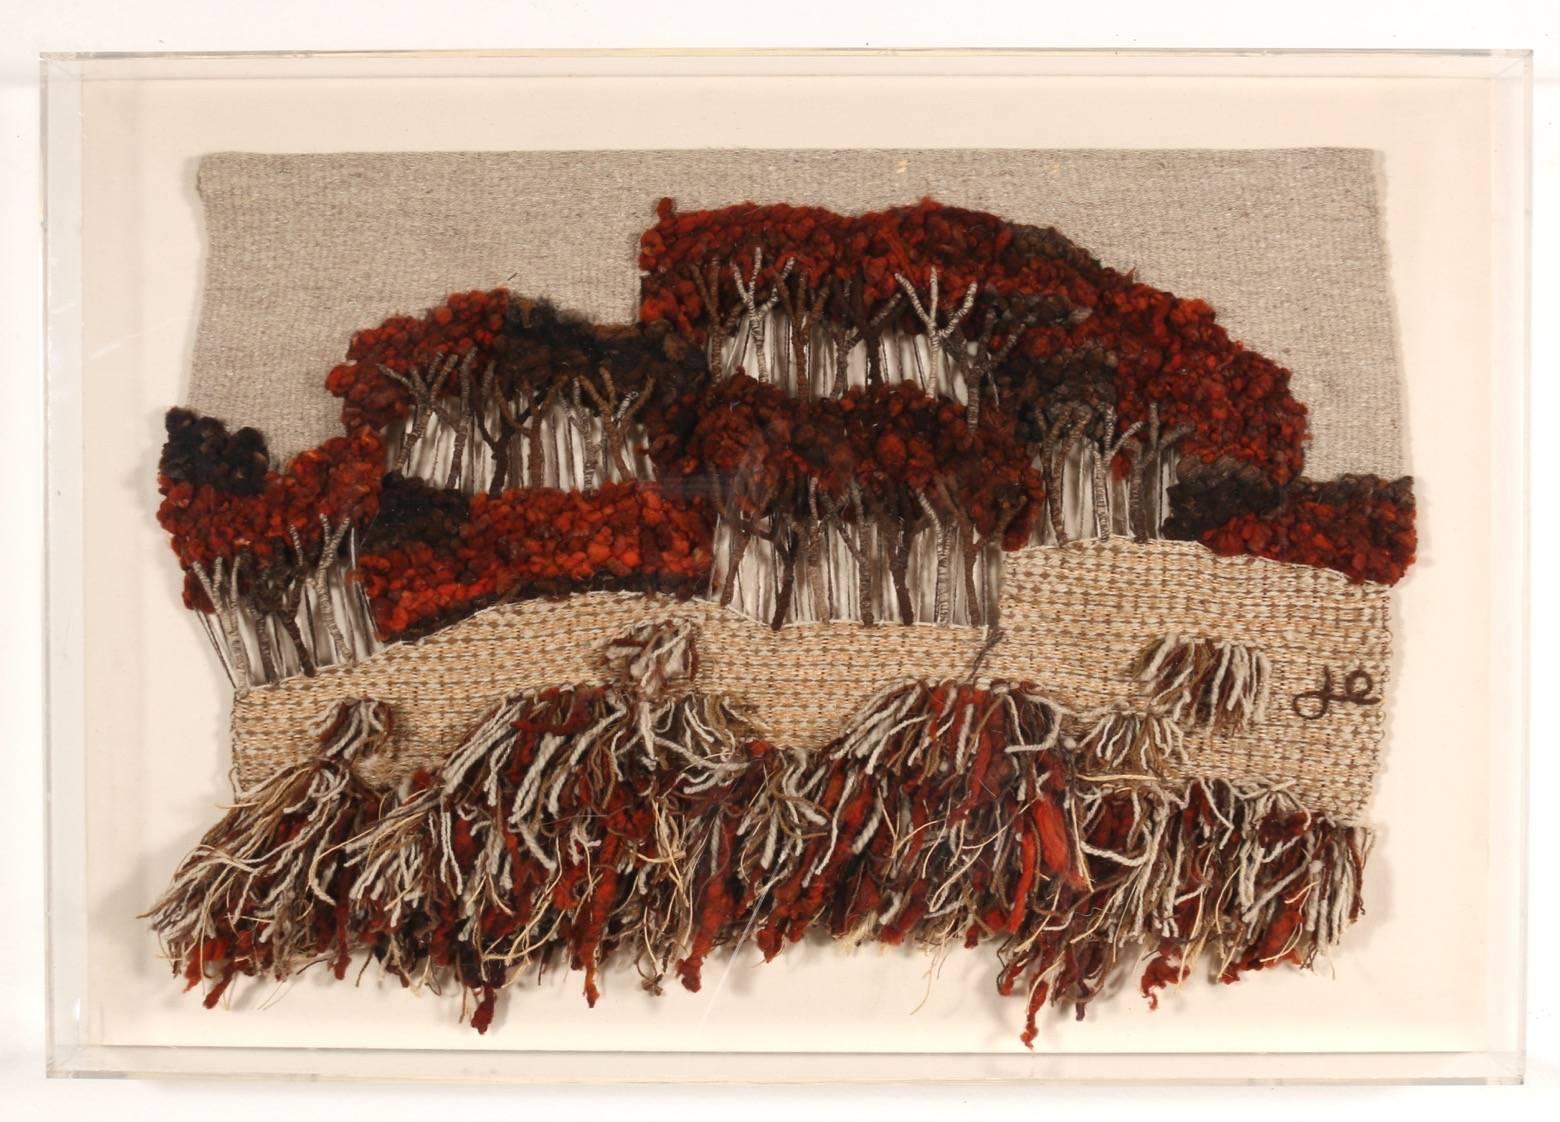 Handmade wall hanging woven circa 1960s. Natural colors and variety of texture display beautifully, framed or unframed. Technically and aesthetically impressive with a complete understanding of fiber art medium. 

Offered as found professionally